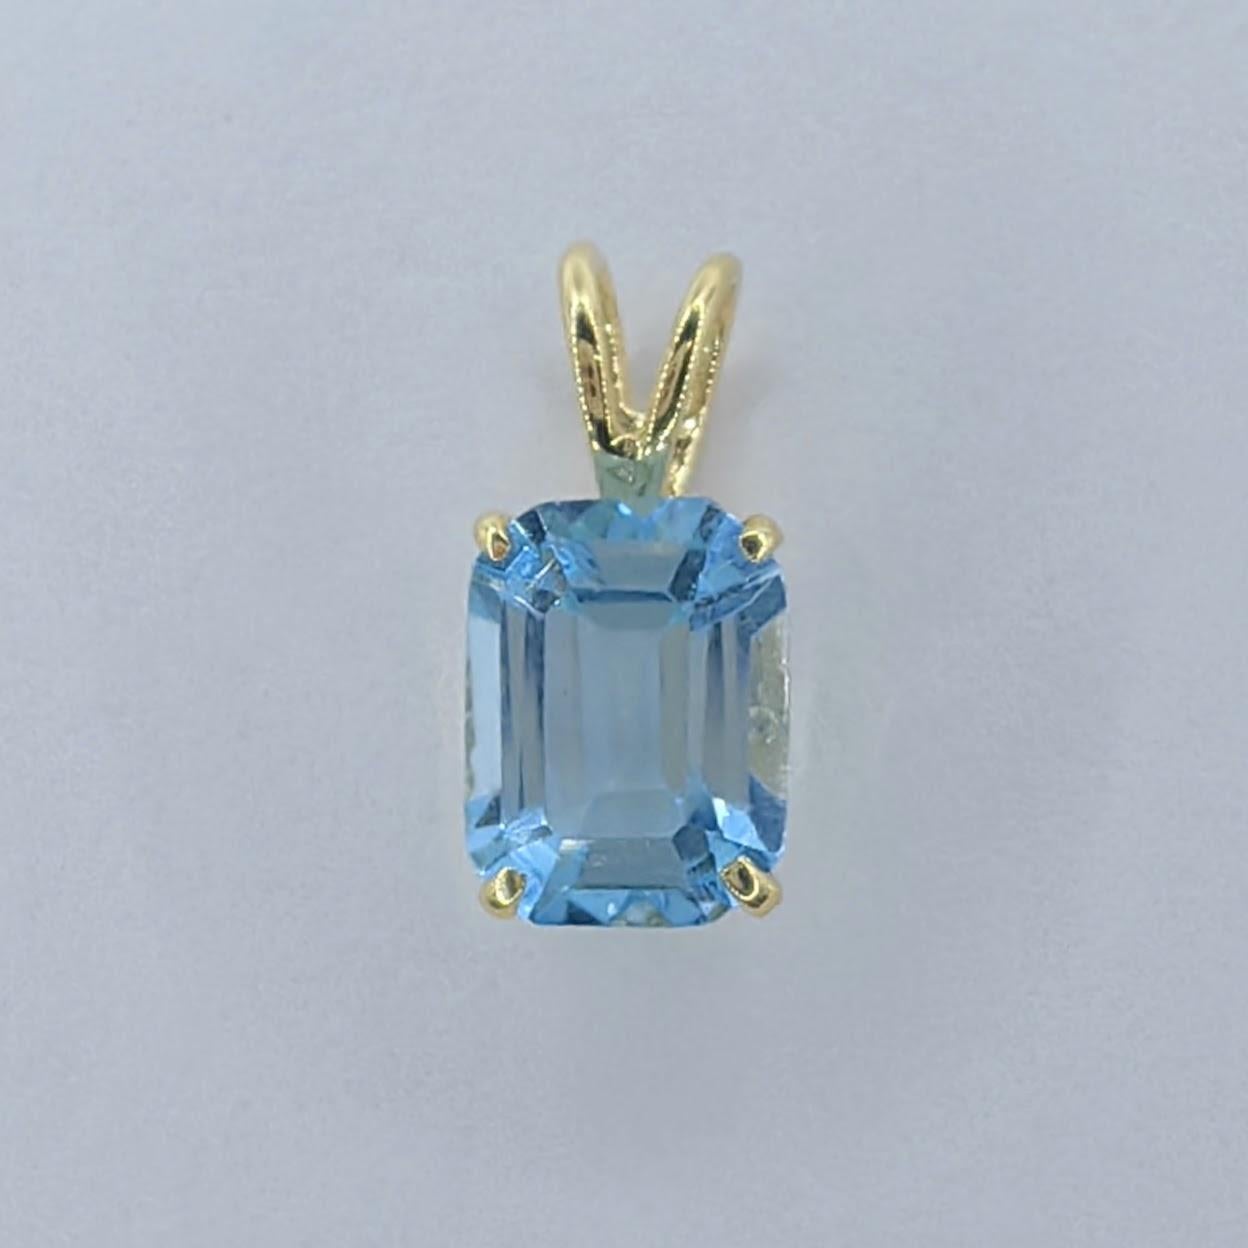 Vintage 1980's Emerald Cut Blue Topaz Necklace Pendant in 14K Yellow Gold #1 In New Condition For Sale In Wan Chai District, HK